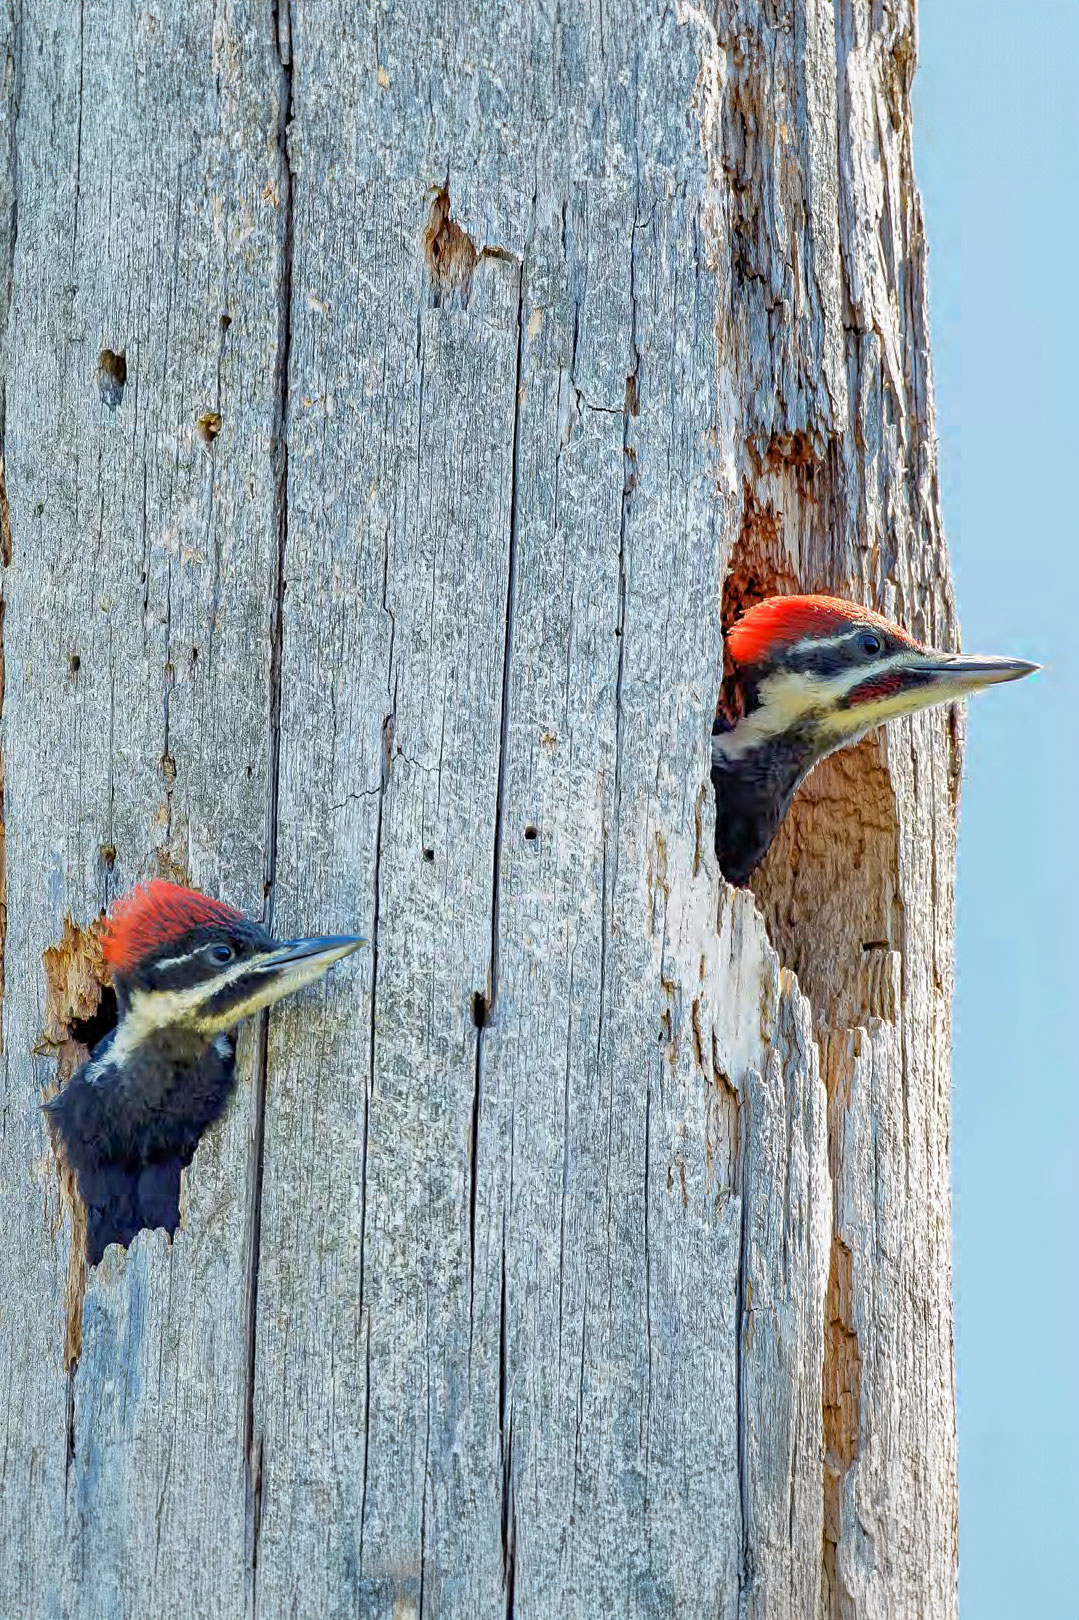 Pileated Woodpecker photo credit Laura Wong